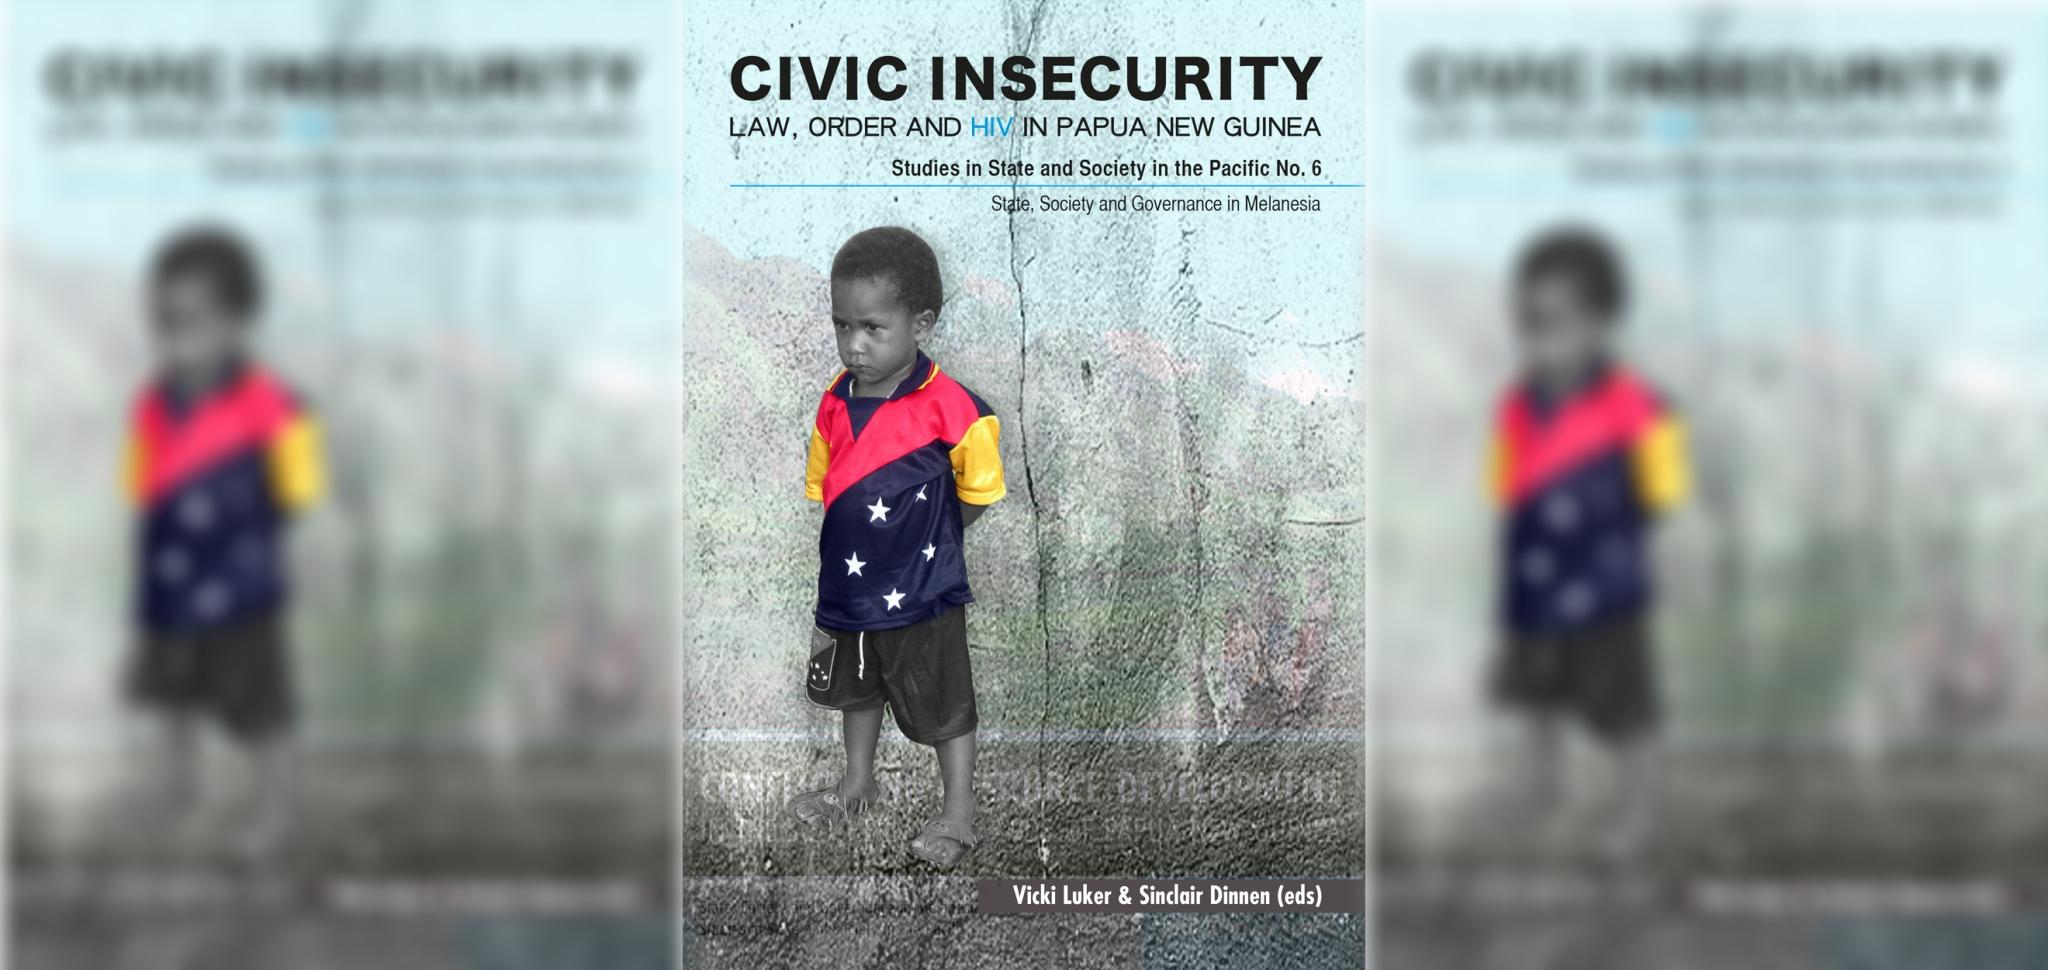 Civic Insecurity Law, Order and HIV in Papua New Guinea